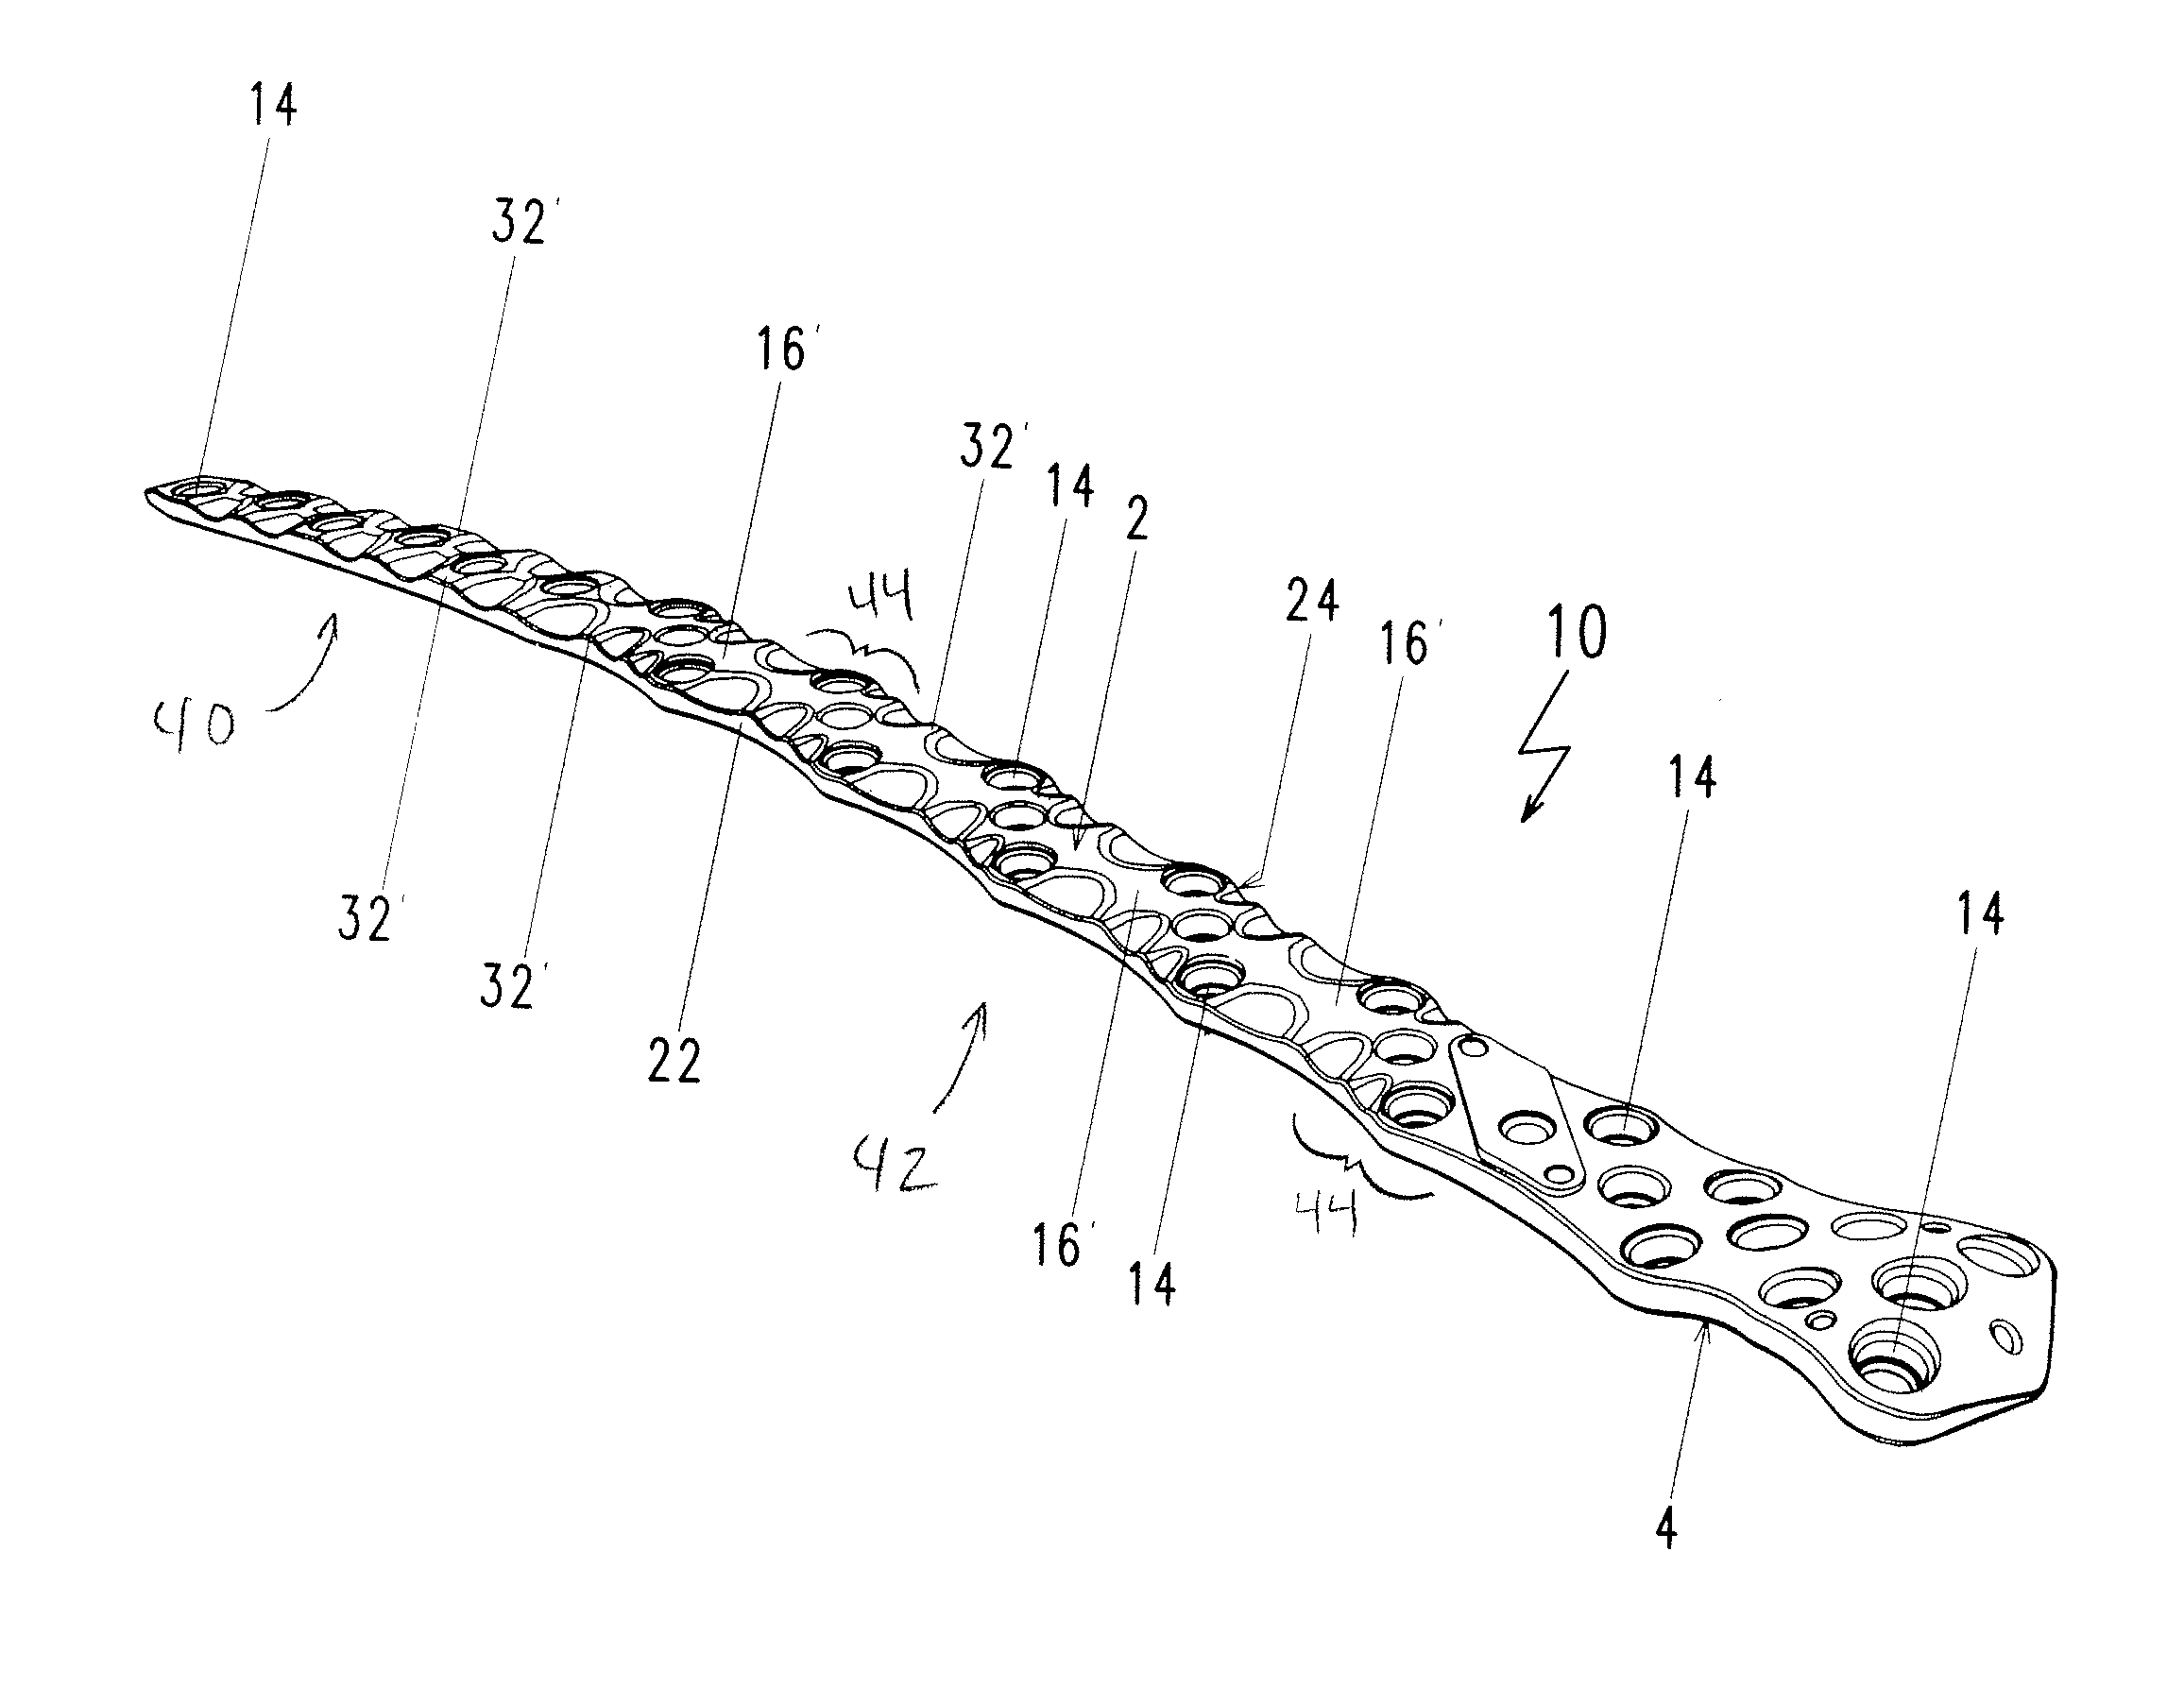 Plate for the treatment of bone fractures